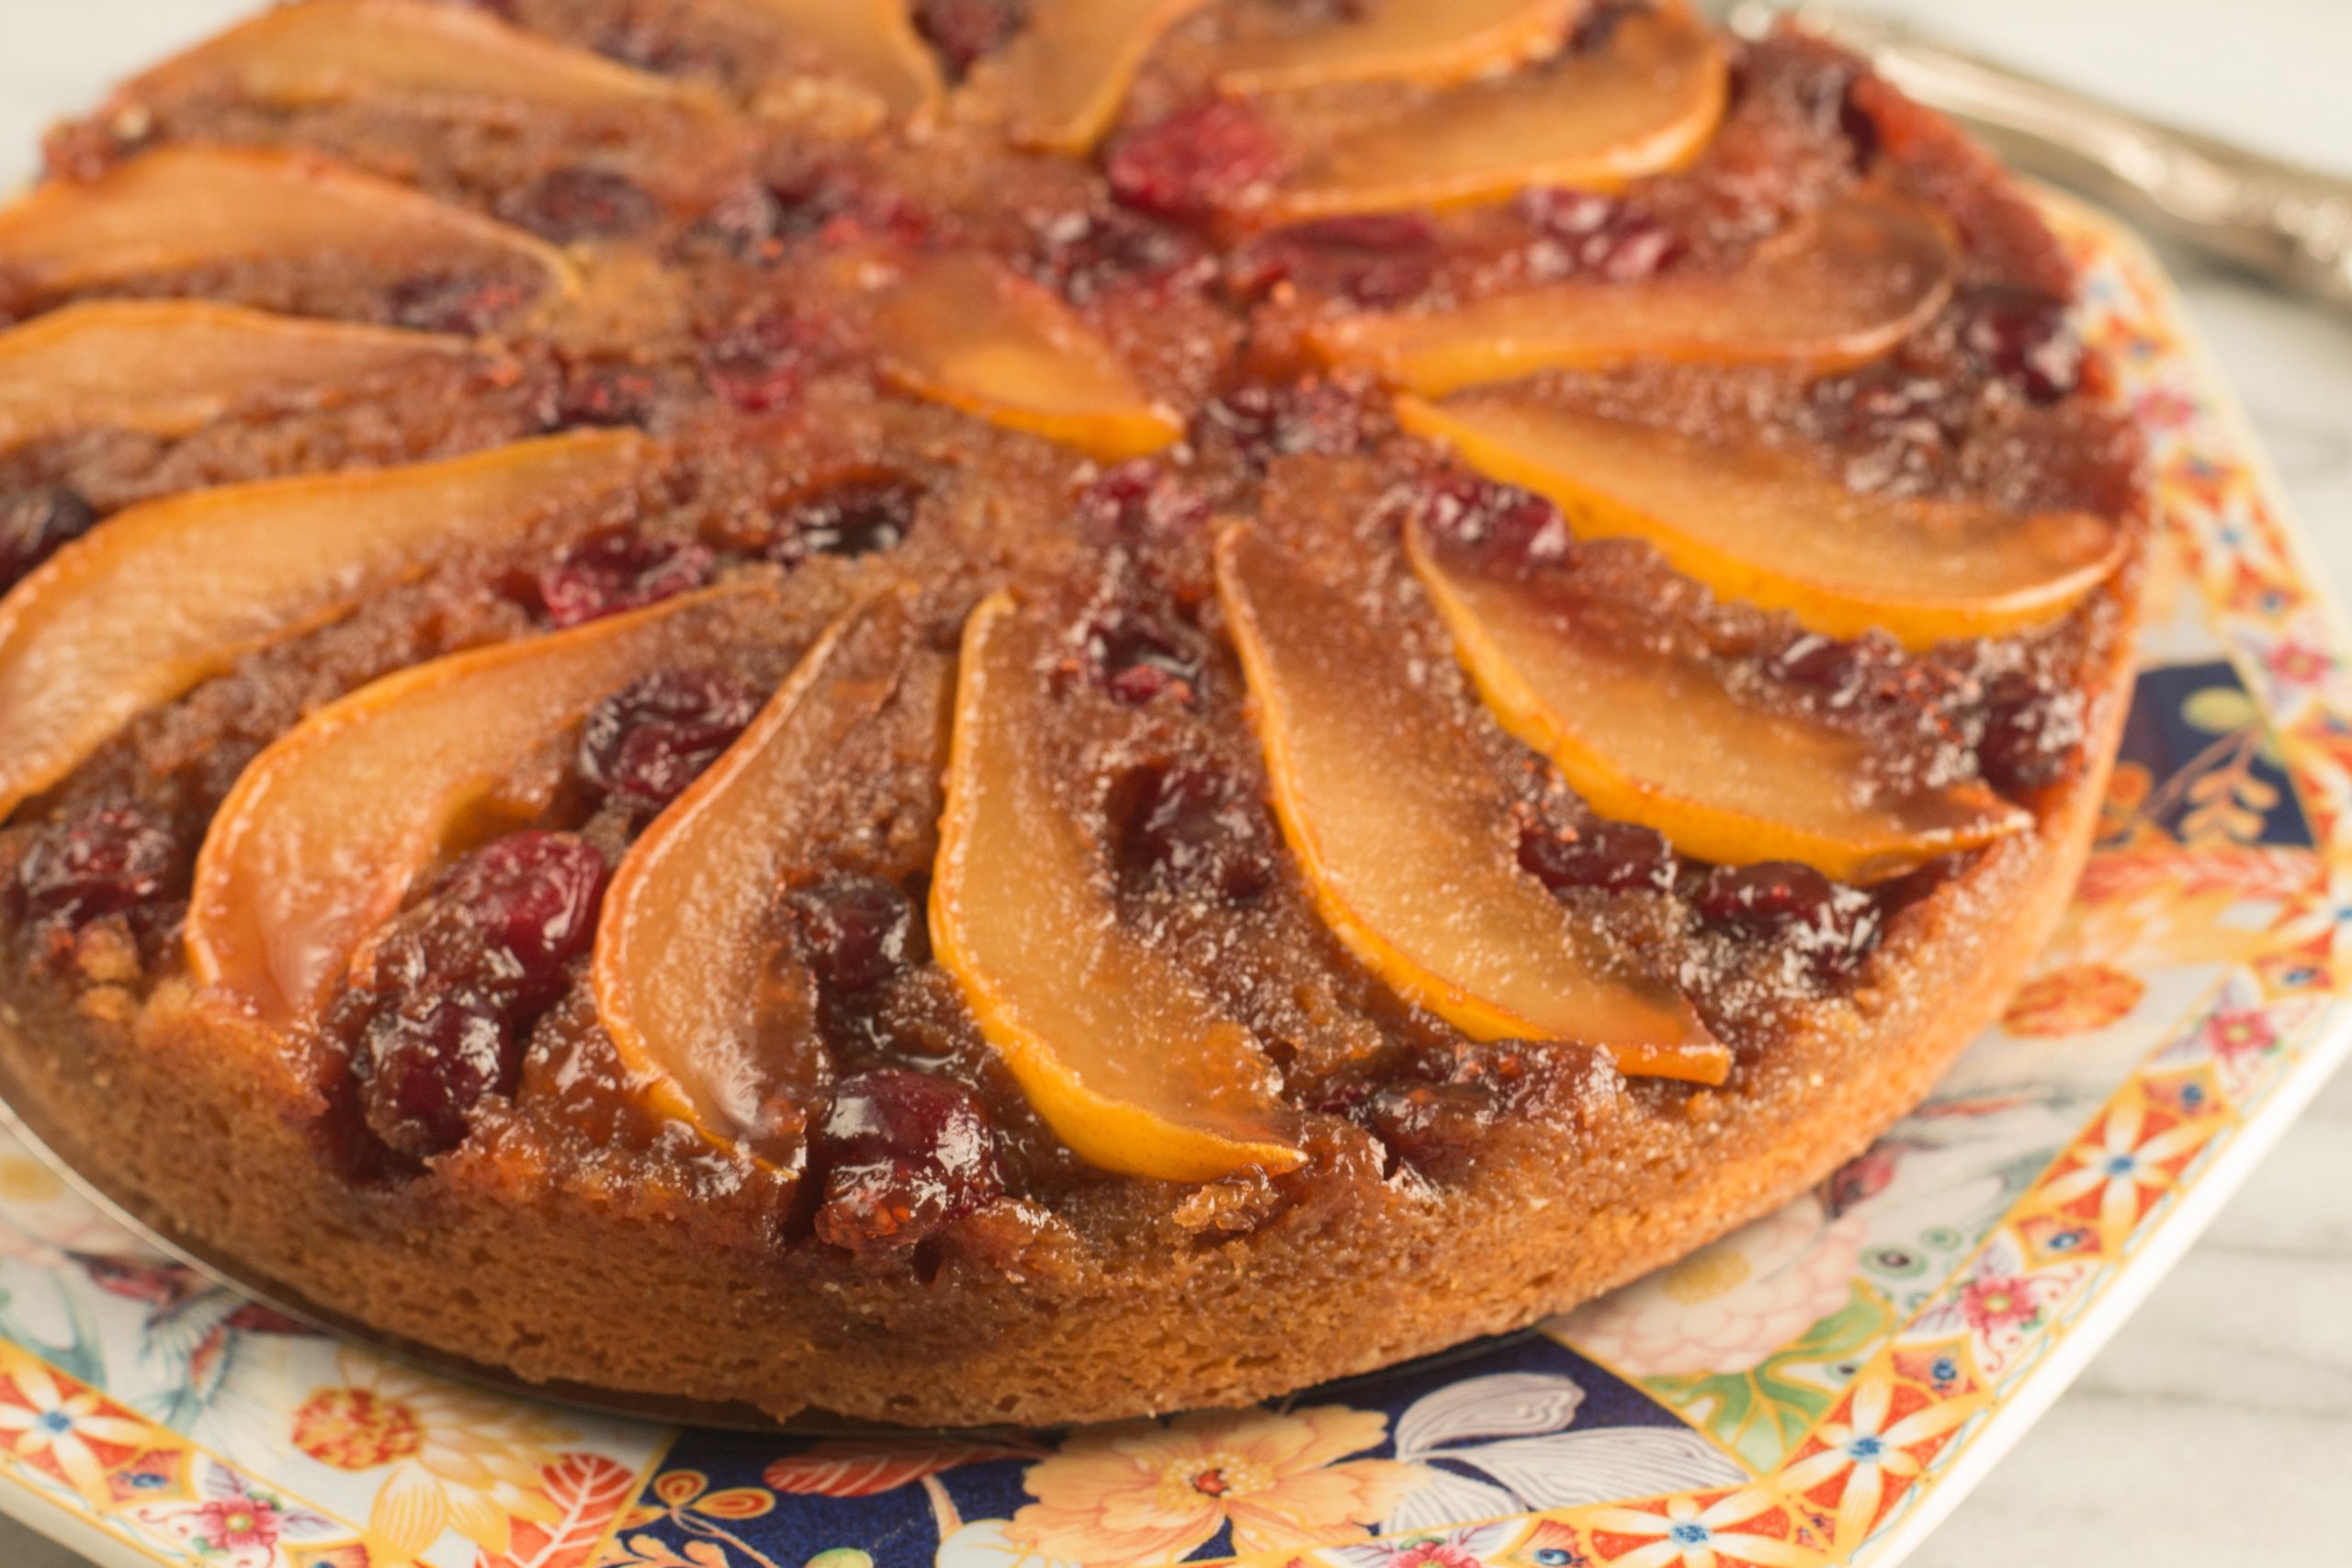 Pear Cranberry Upside Down Cake